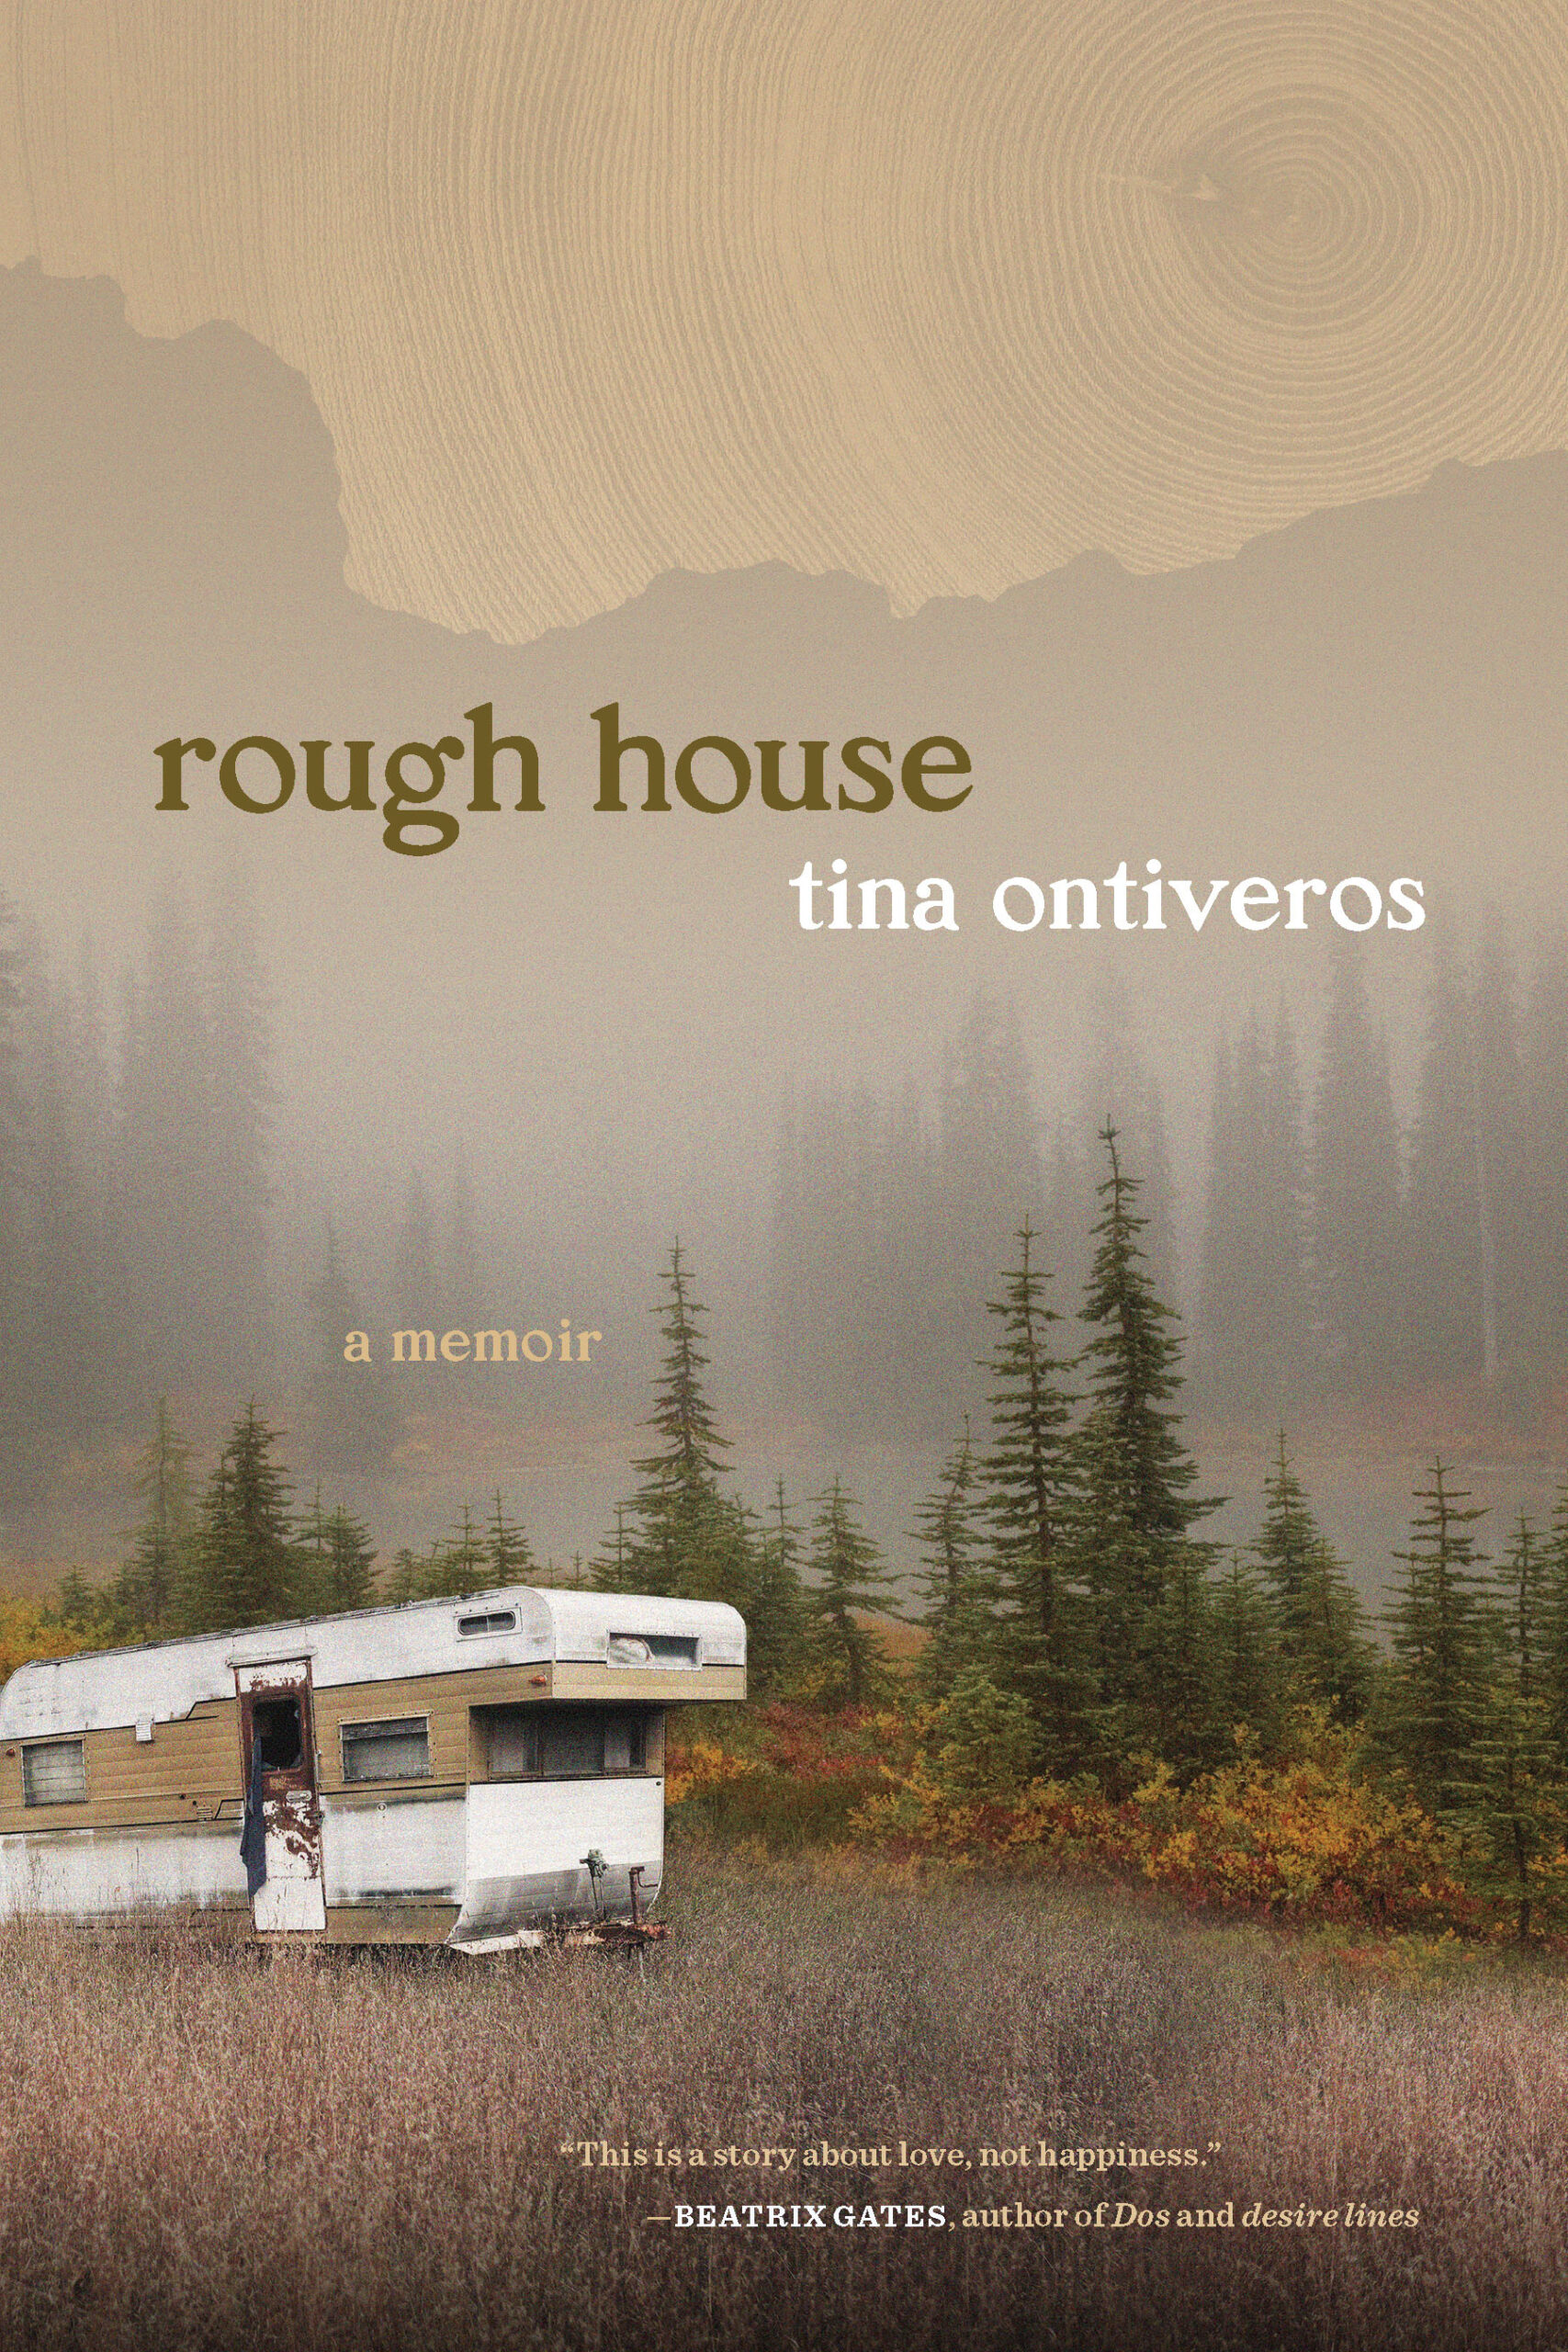 Out of the Woods: Book Review of rough house by Tina Ontiveros